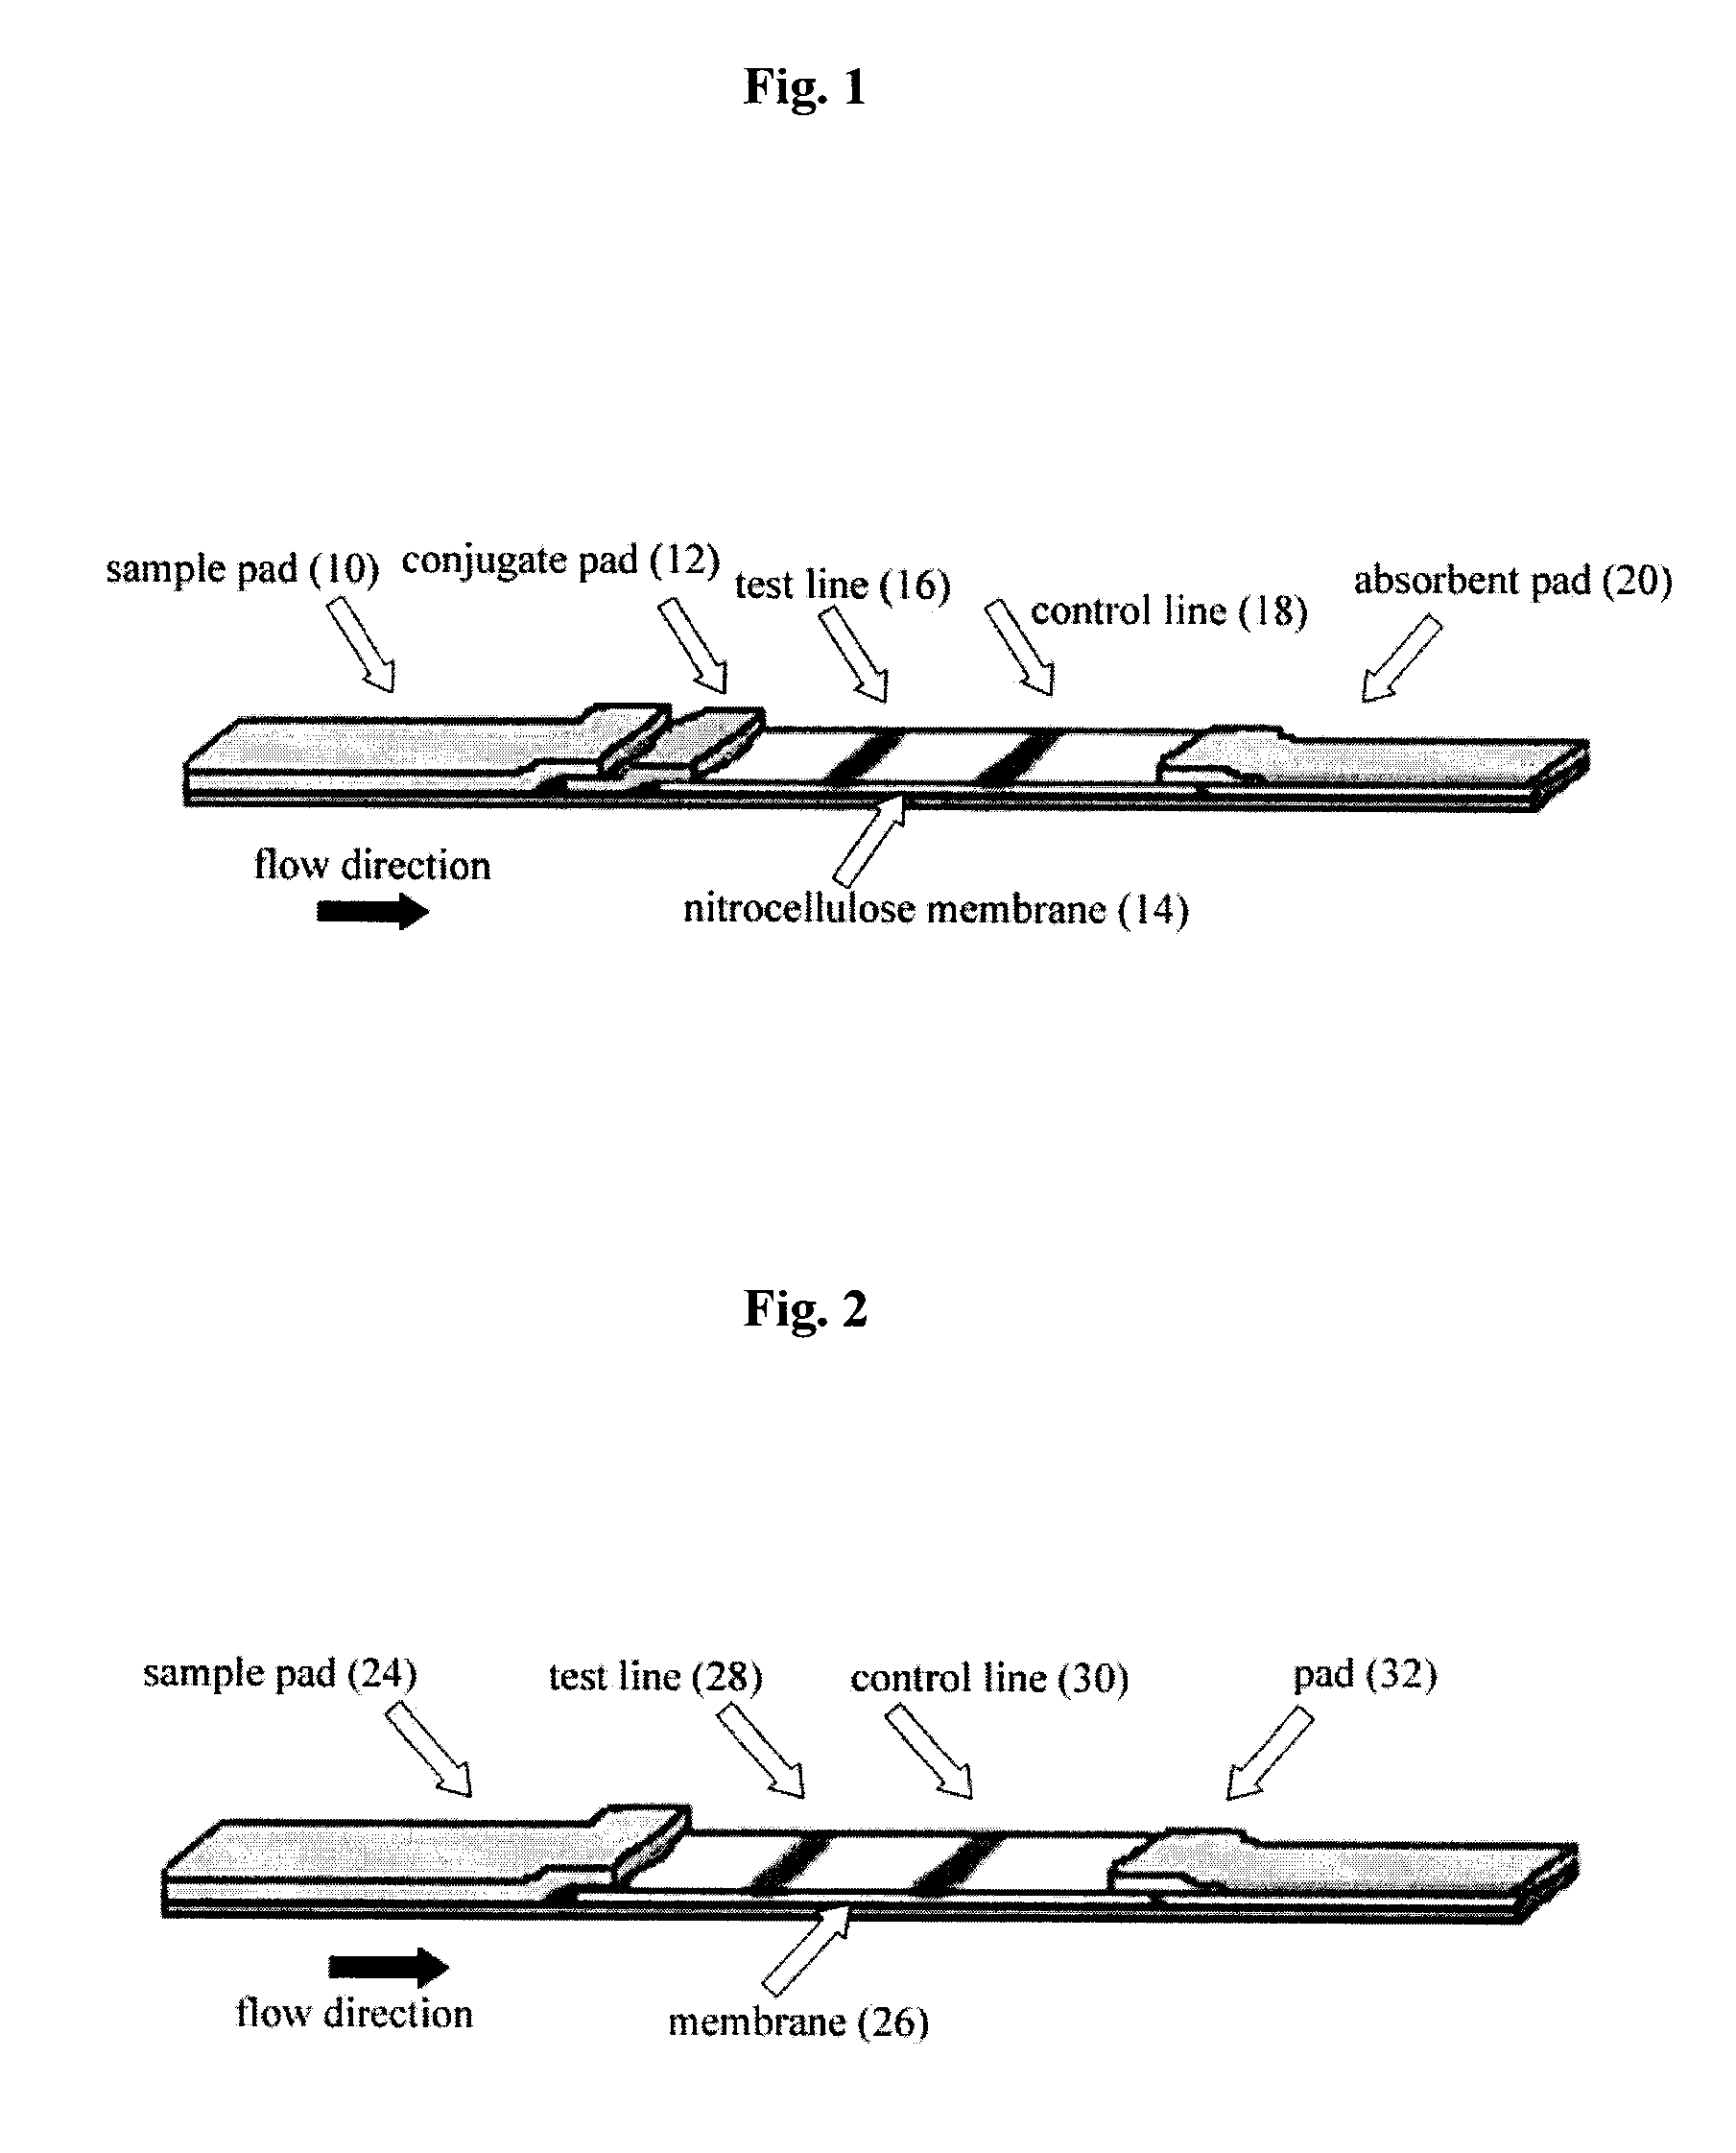 Lateral flow assay system and methods for its use